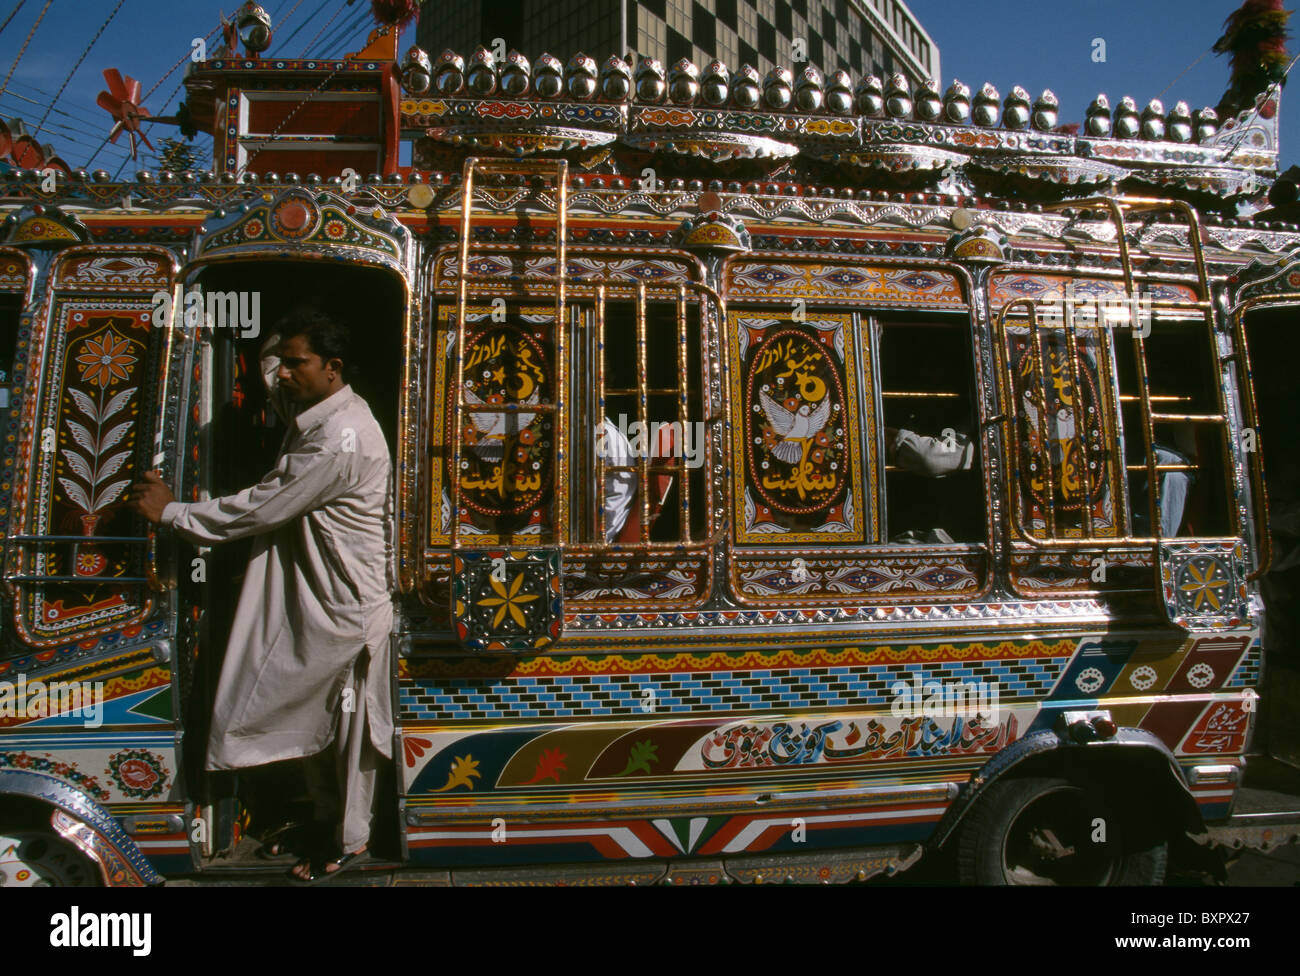 A multi-colored bus moves on the streets of downtown Karachi, Pakistan. Stock Photo